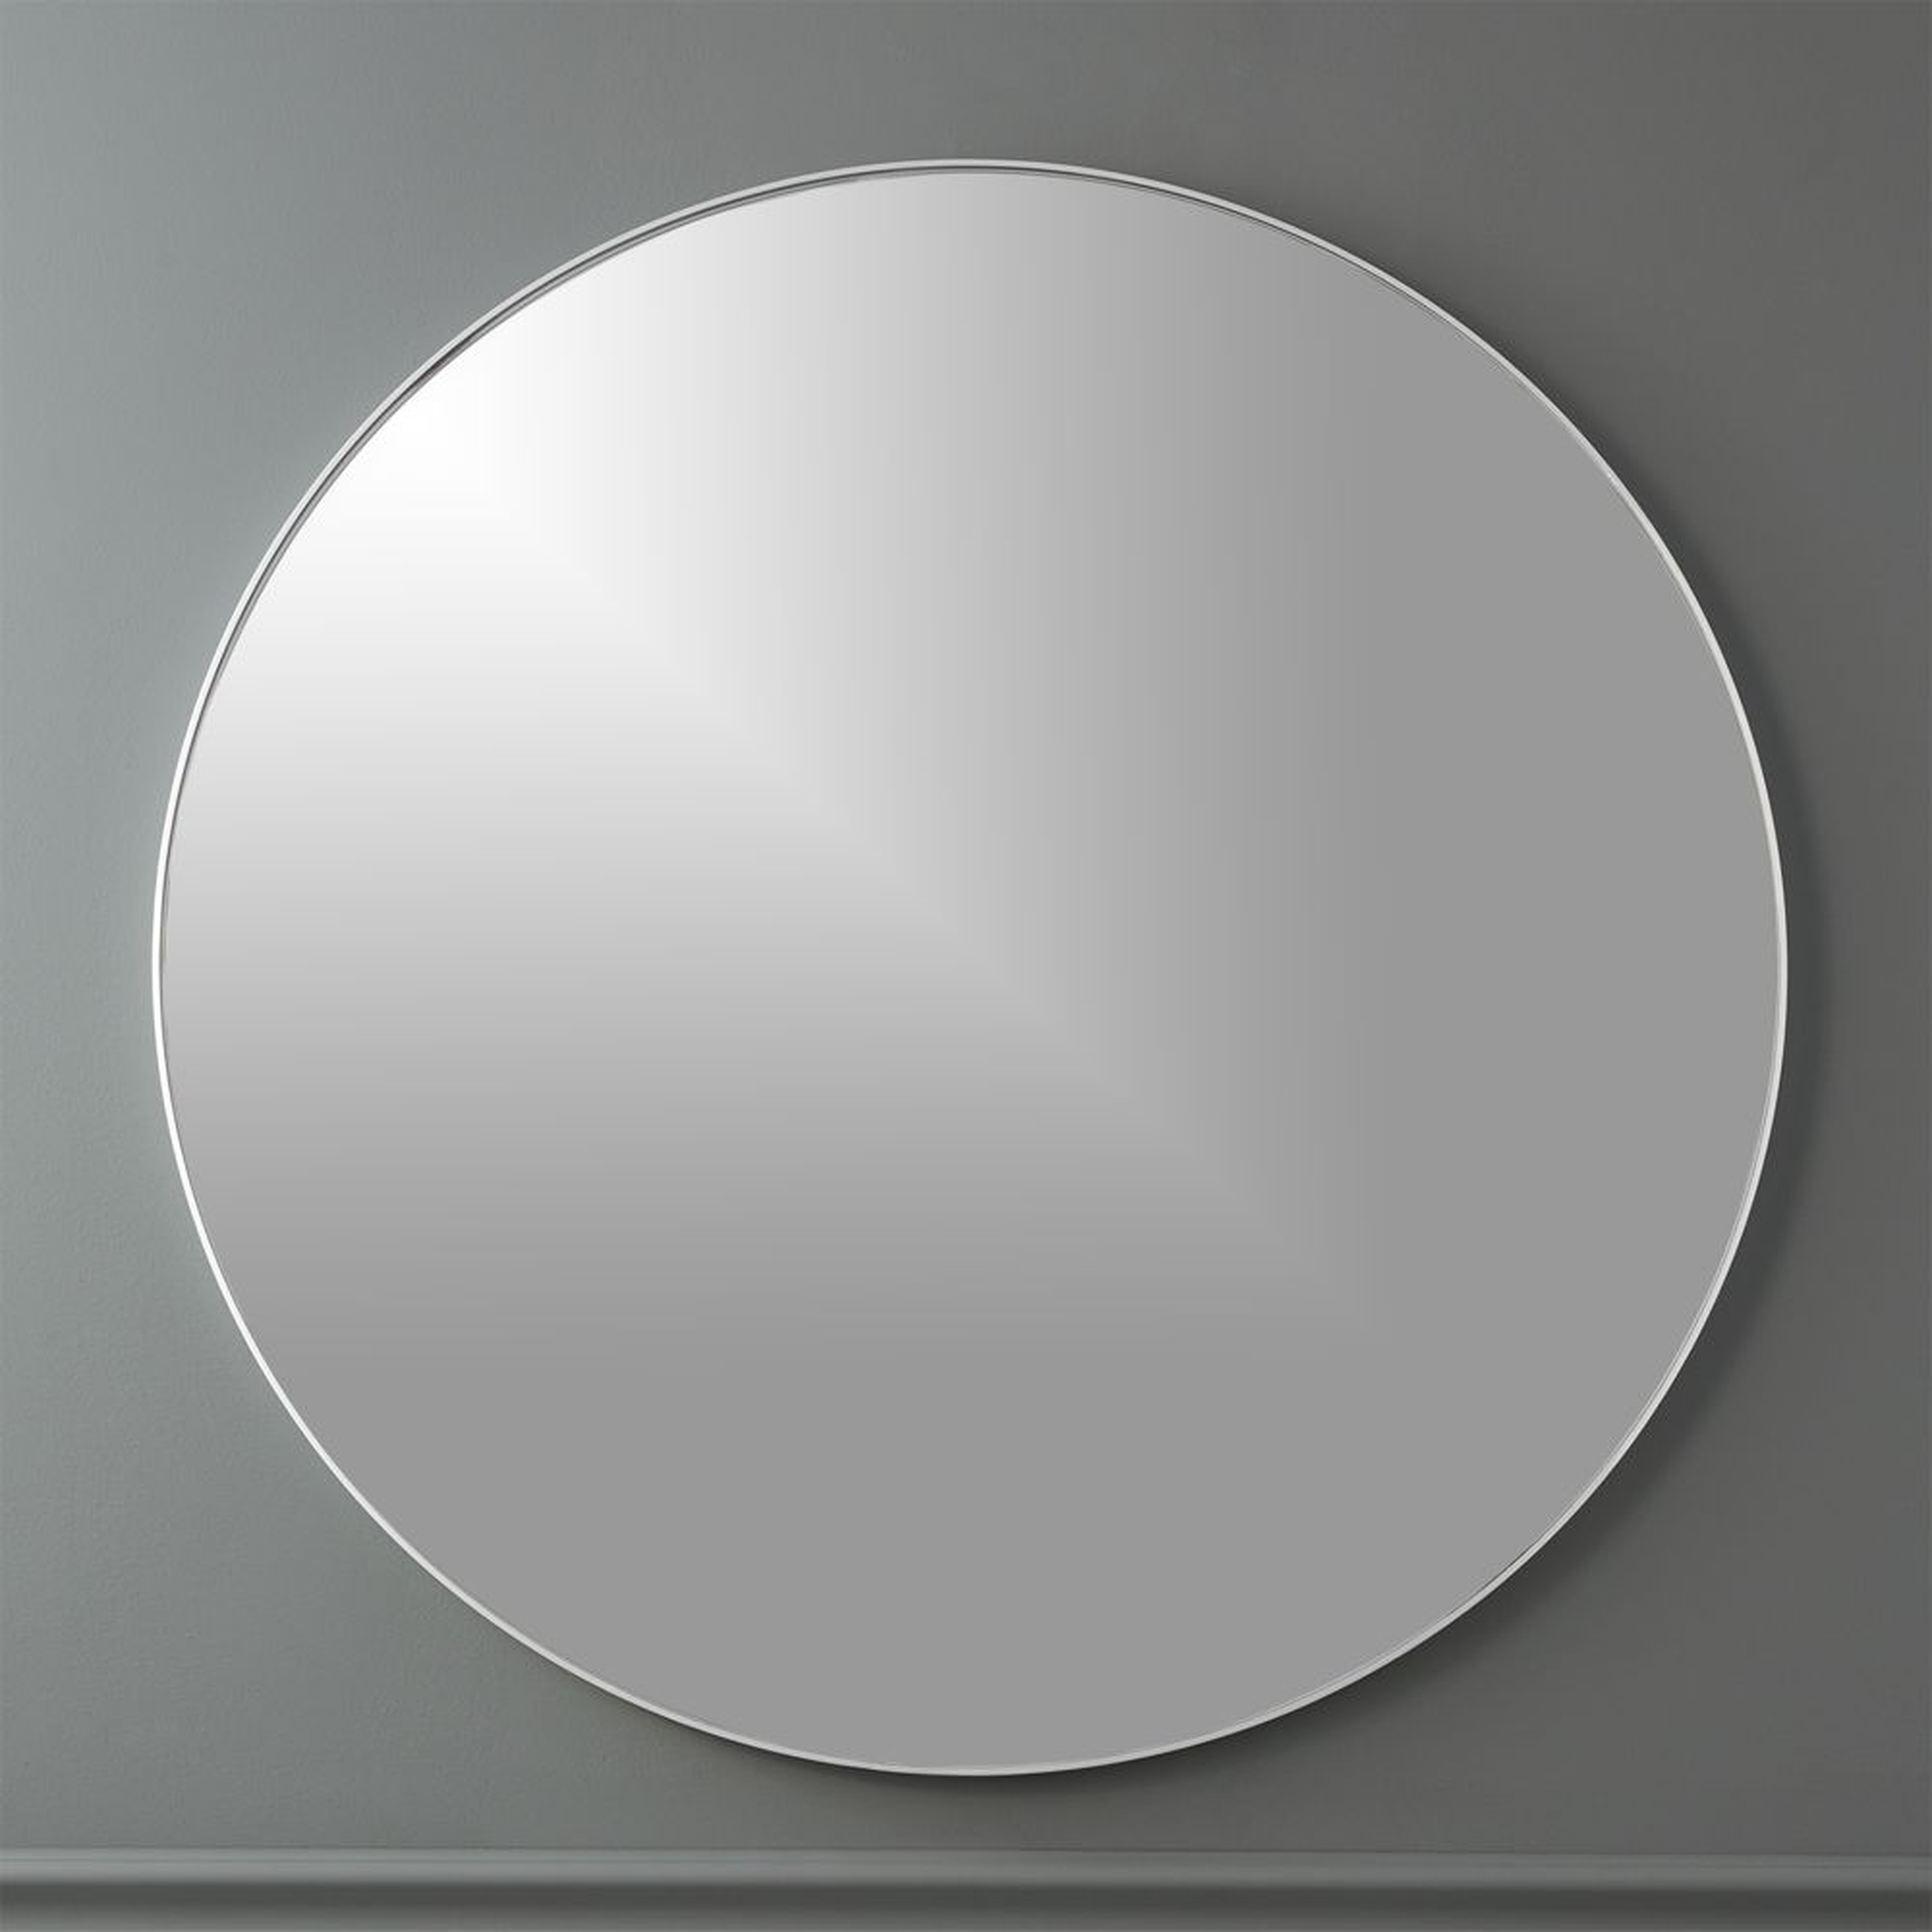 INFINITY 36" ROUND WALL MIRROR, Silver - CB2